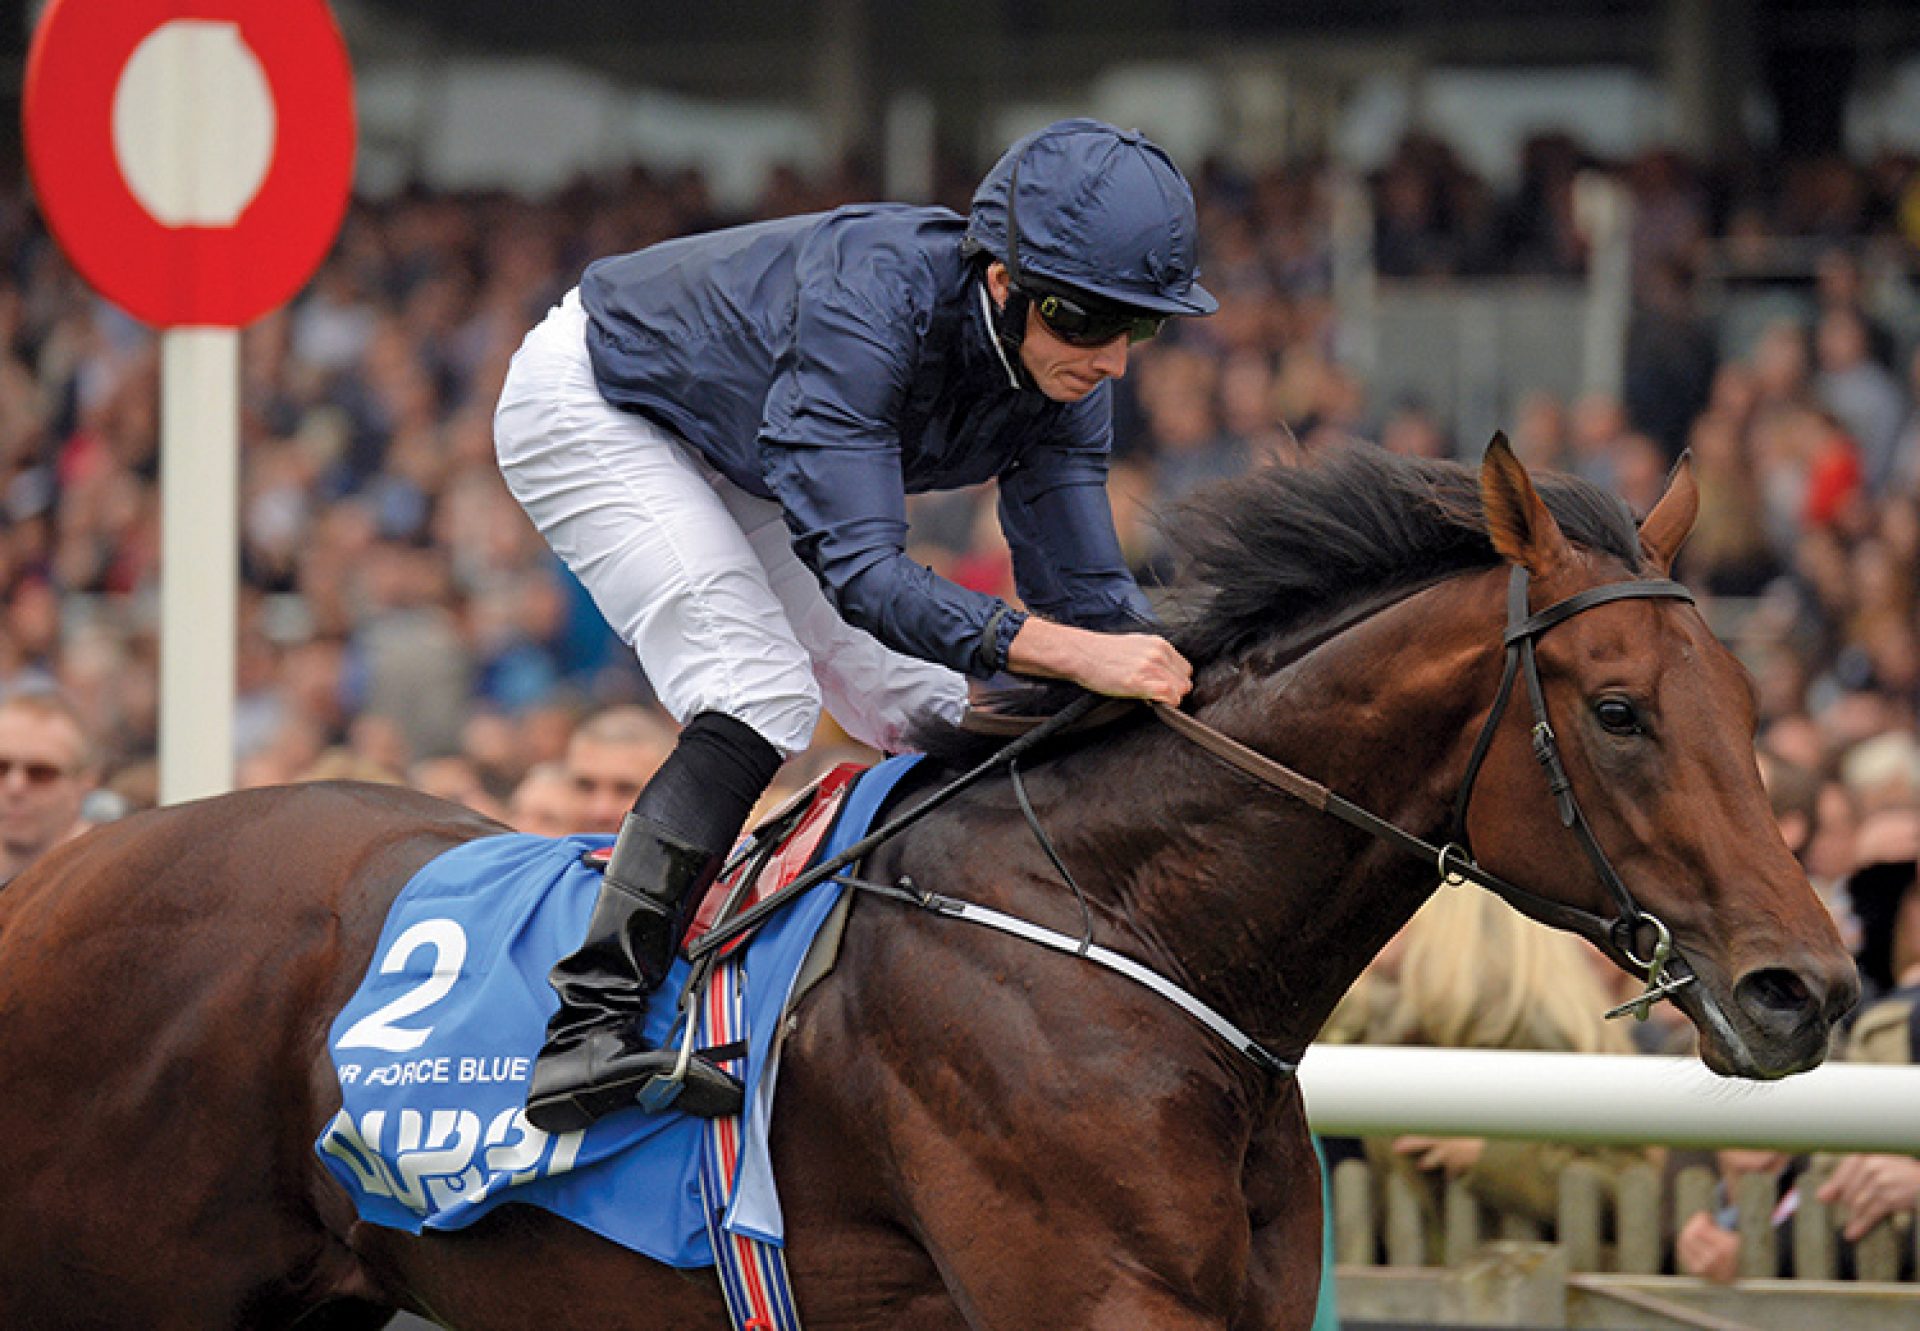 Air Force Blue wining the Dewhurst Stakes at Newmarket